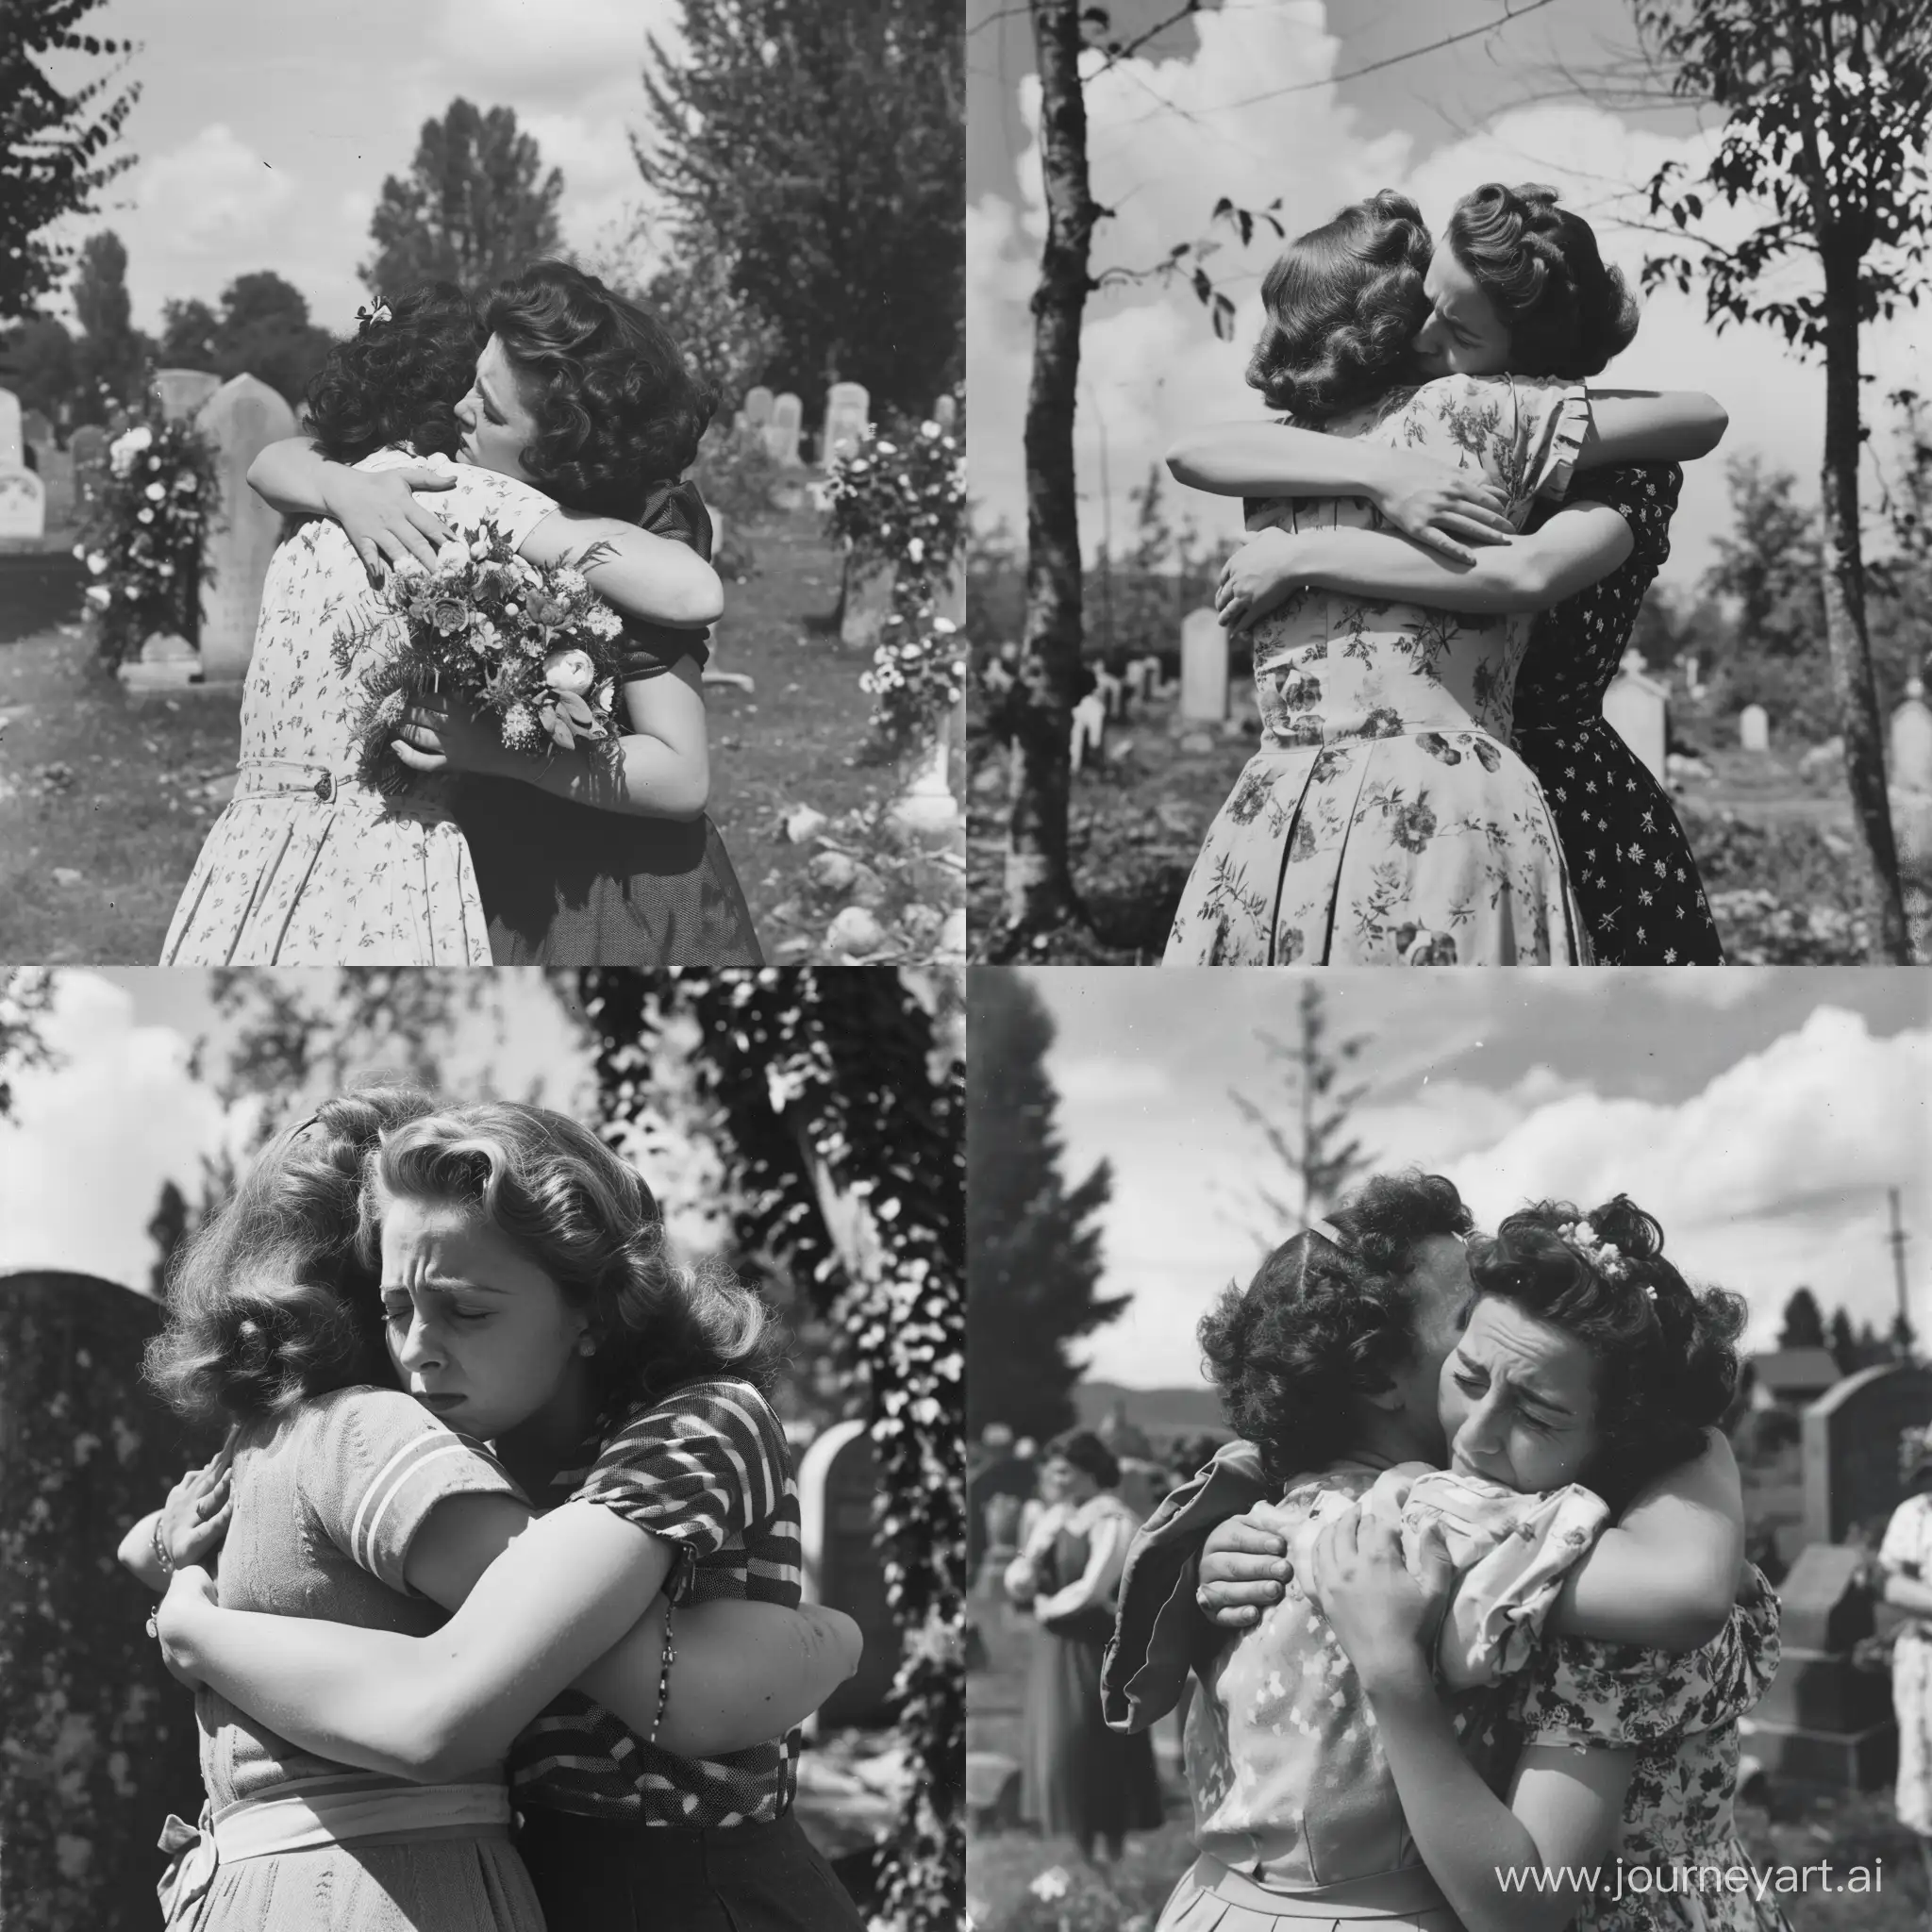 Emotional-Lesbian-Couple-in-Vintage-1950s-French-Cemetery-Hug-and-Kiss